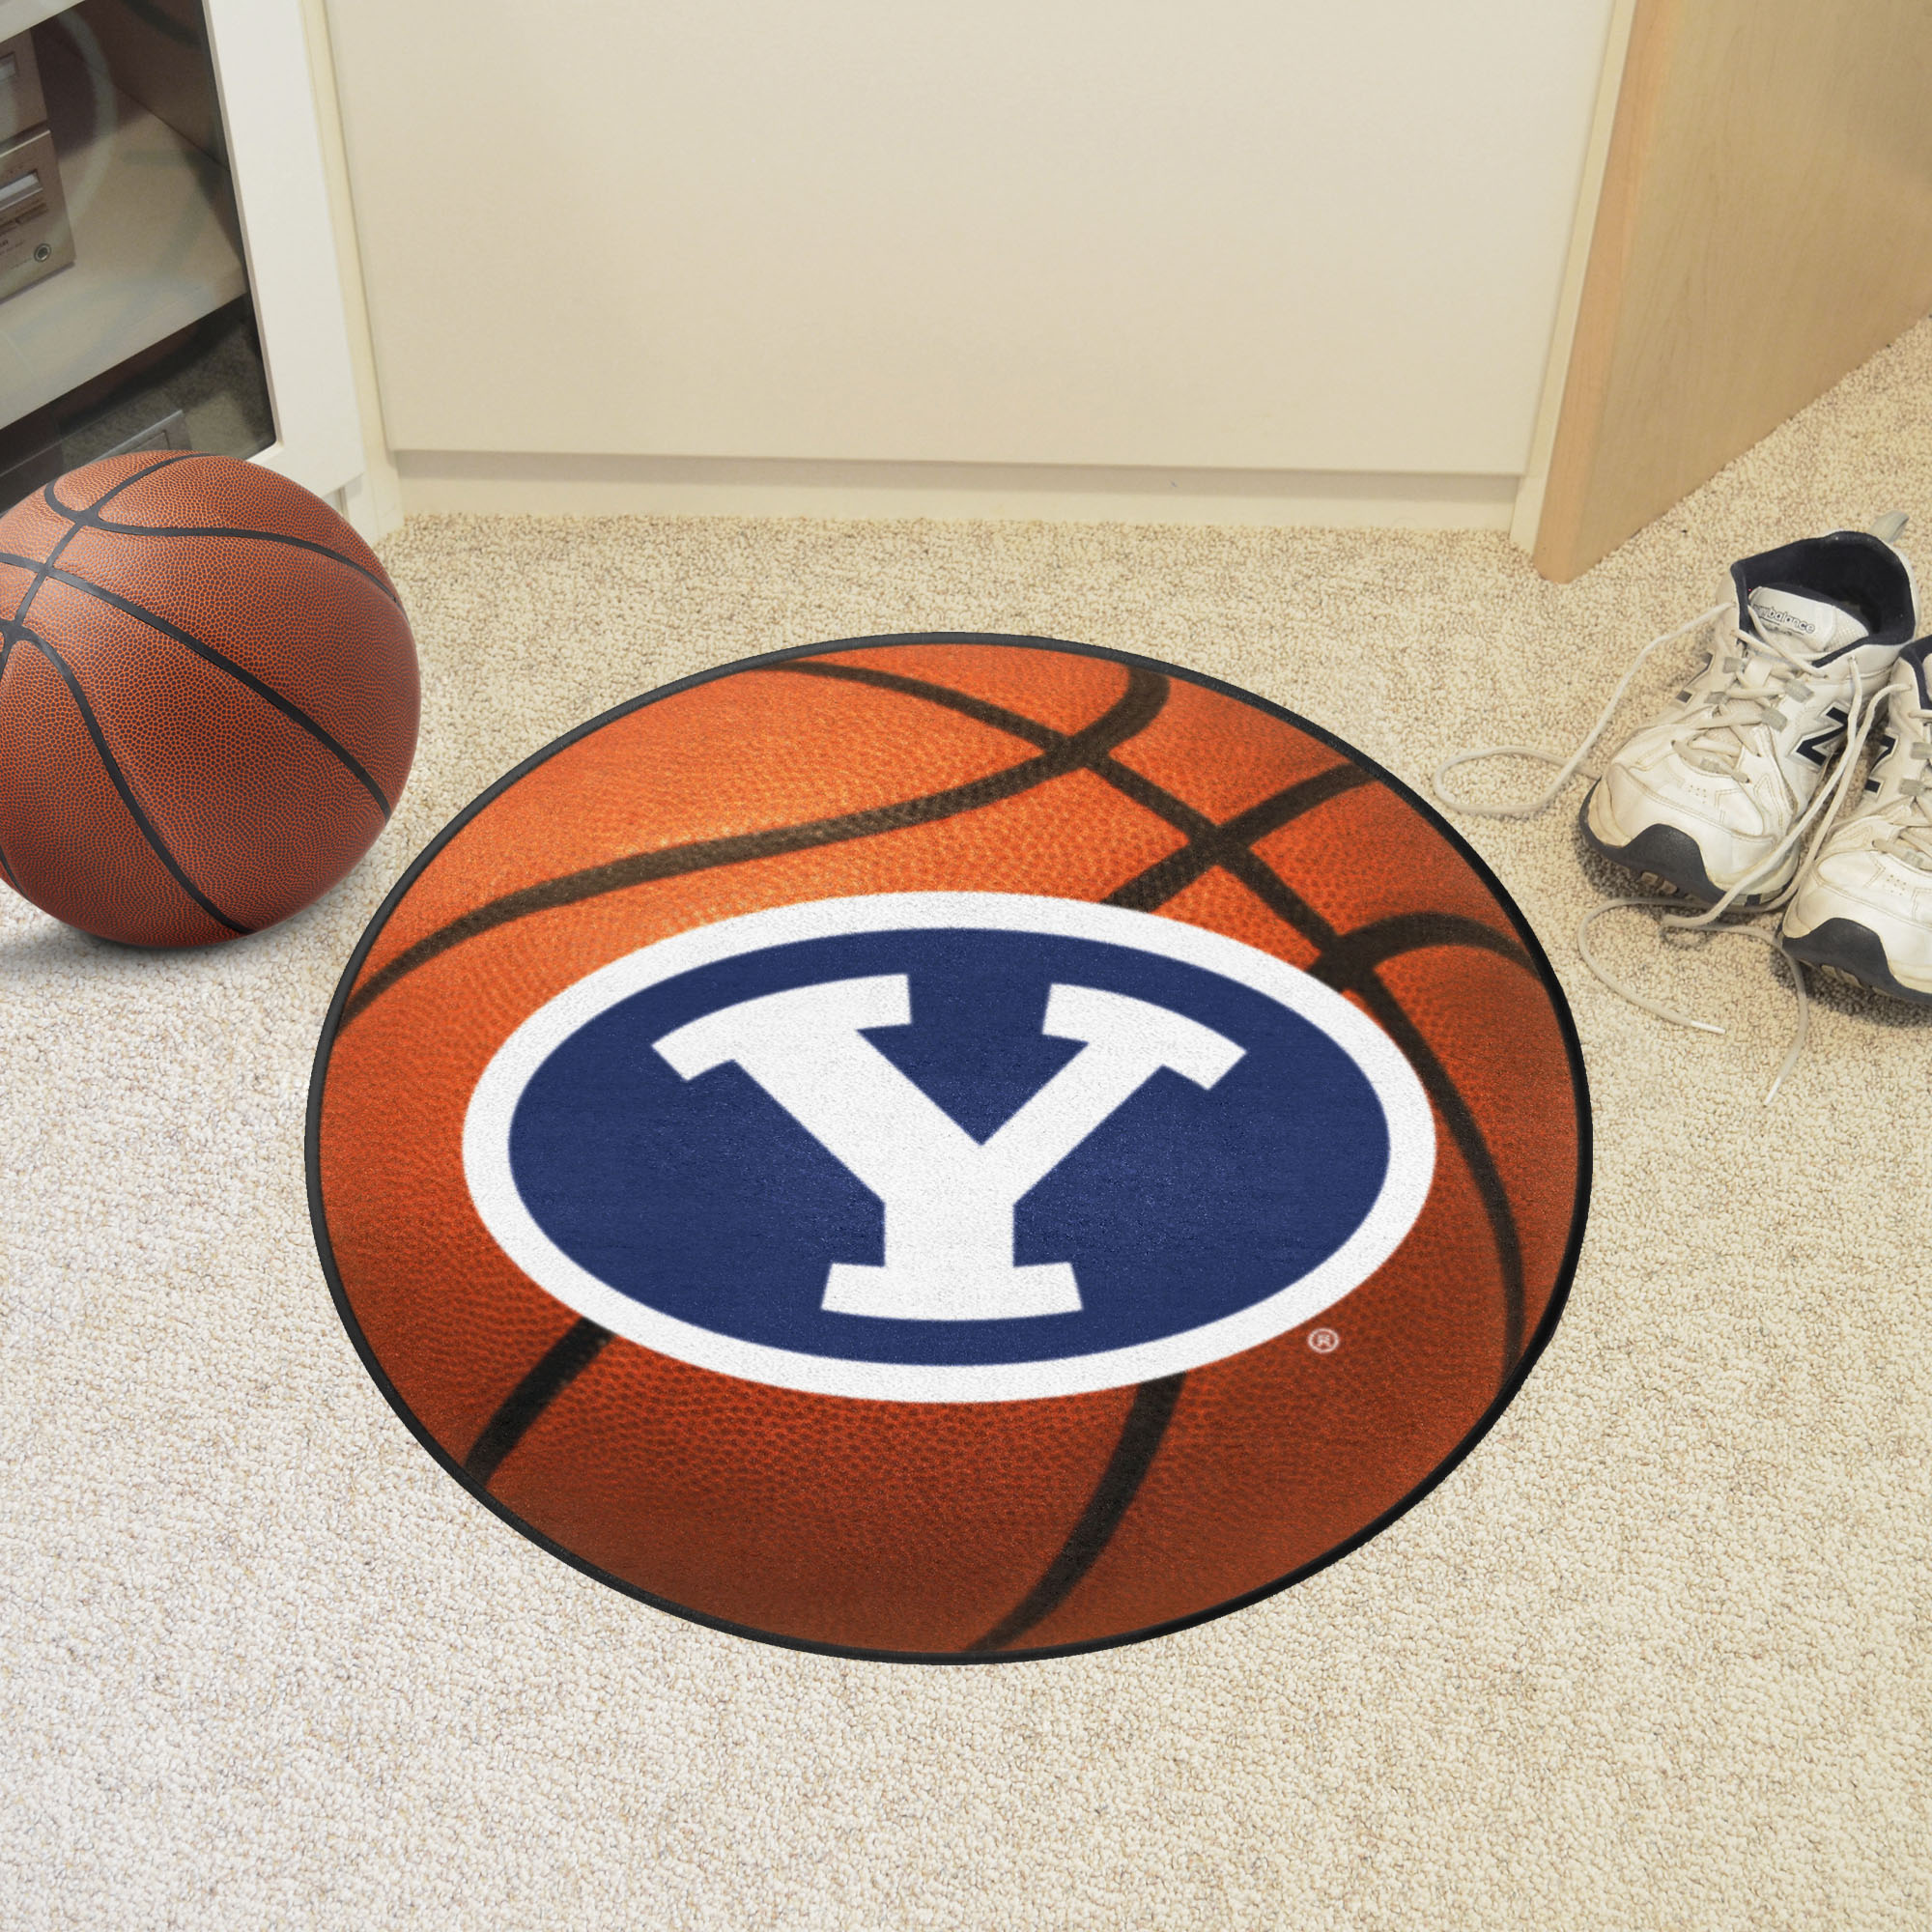 Brigham Young University Ball Shaped Area Rugs (Ball Shaped Area Rugs: Basketball)